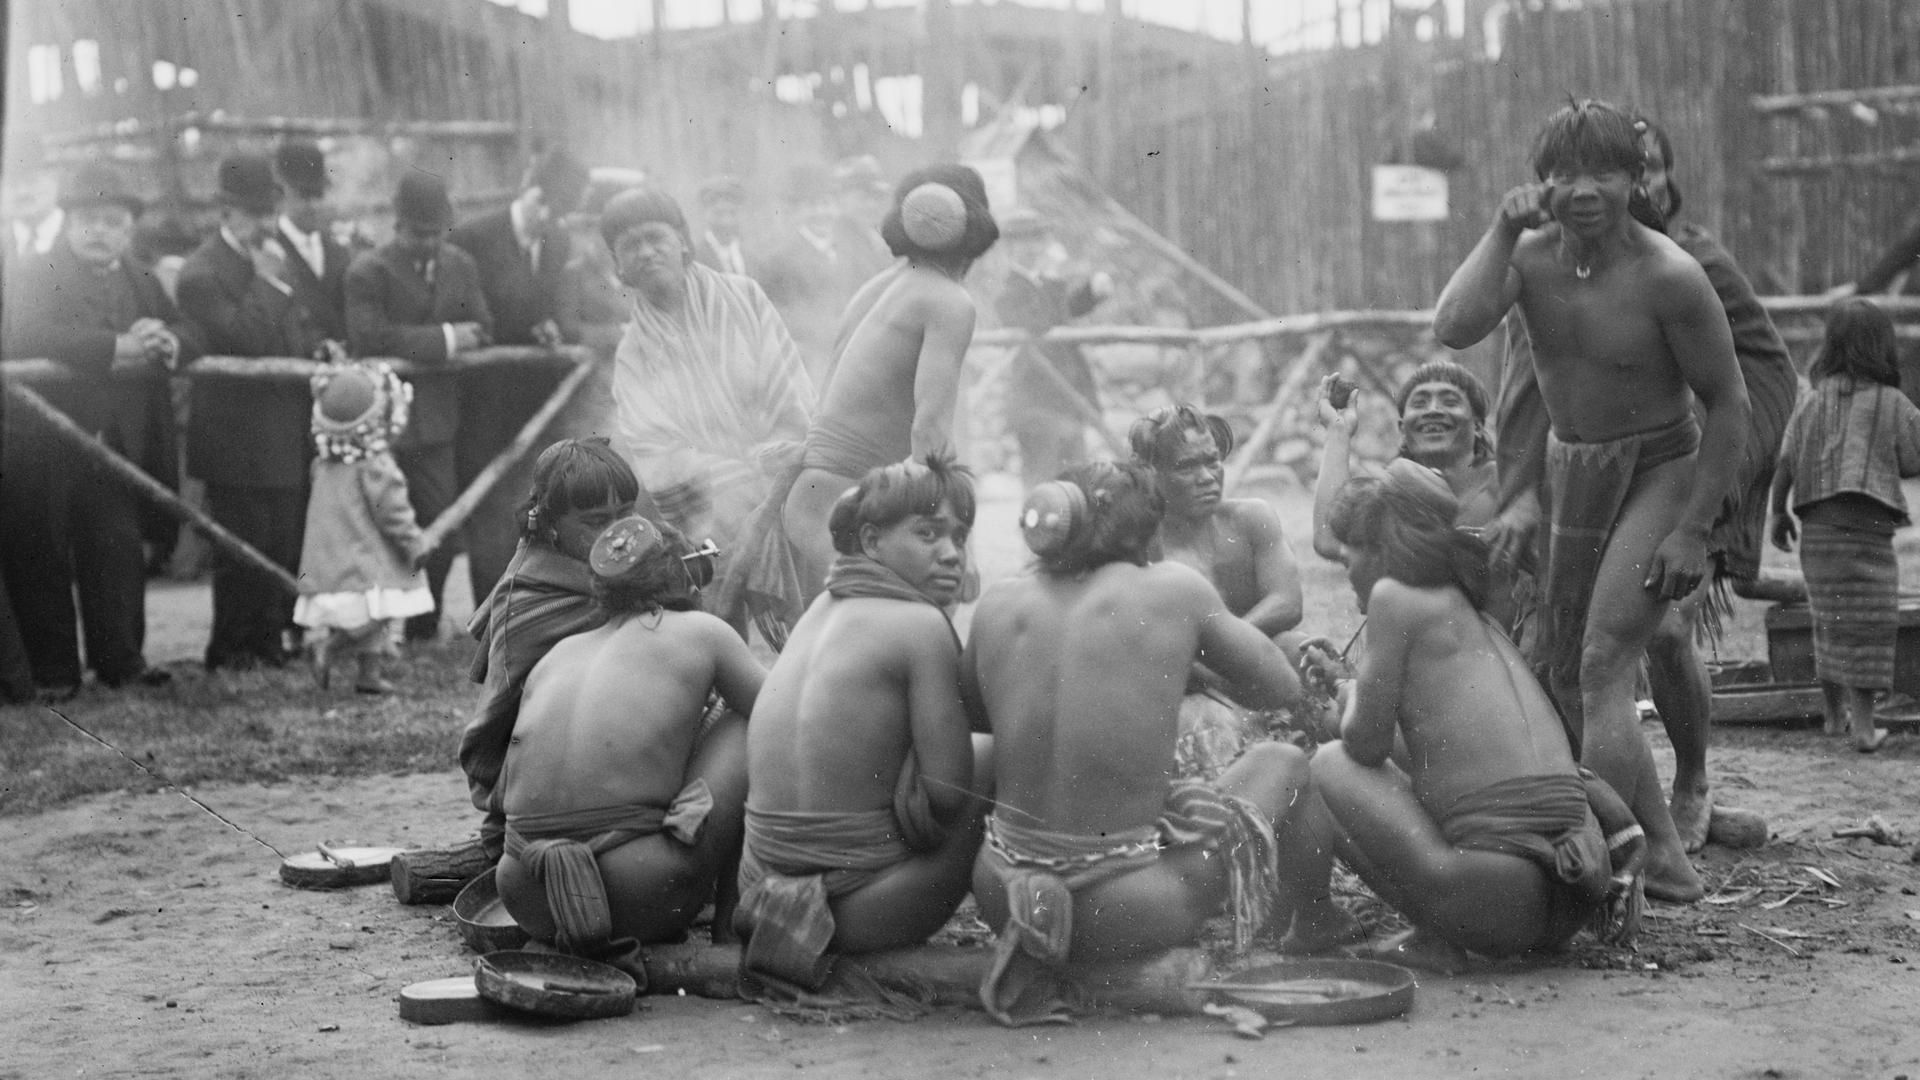 The Igorrotes sitting around a campfire, and playing up for the camera, at Coney Island in the summer of 1905.